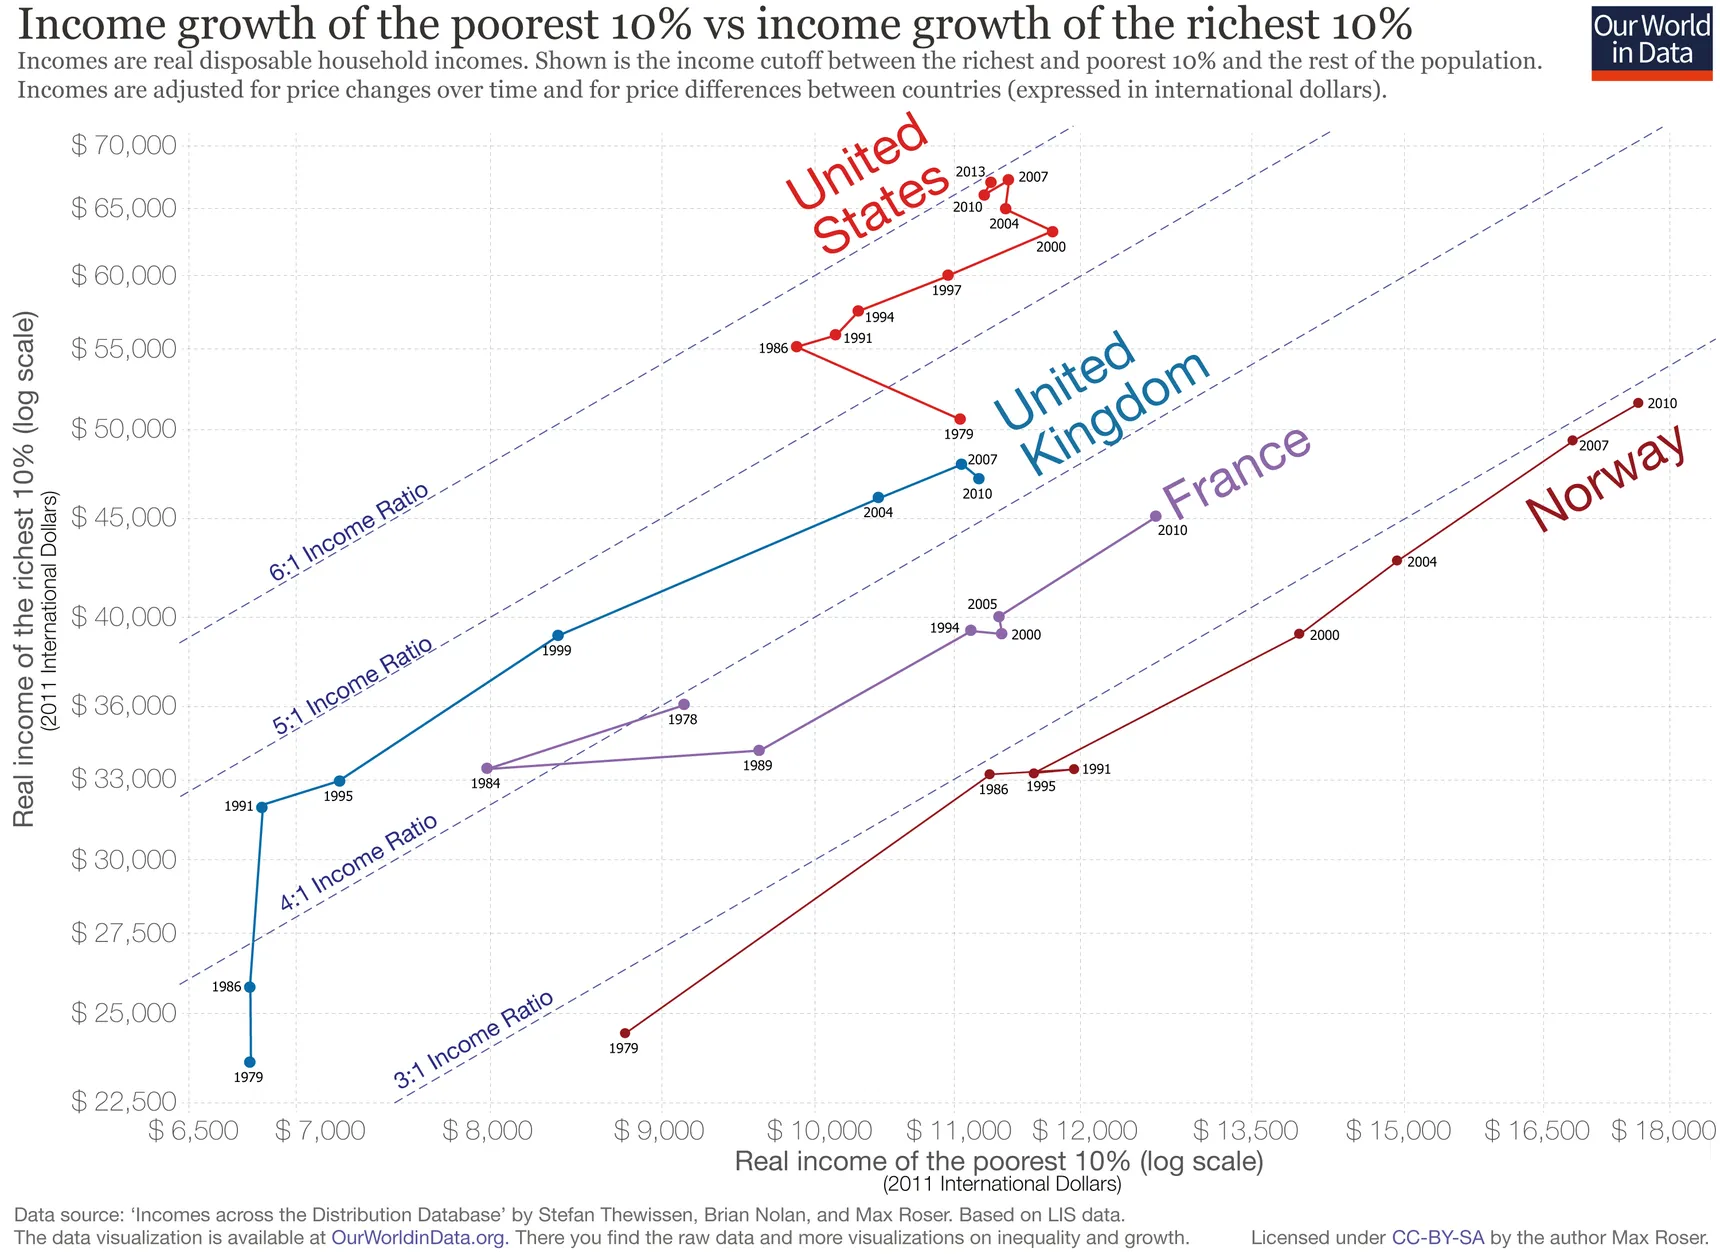 A line chart titled 'Income growth of the poorest 10% vs income growth of the richest 10%', showing trajectories for the US, the UK, France and Norway